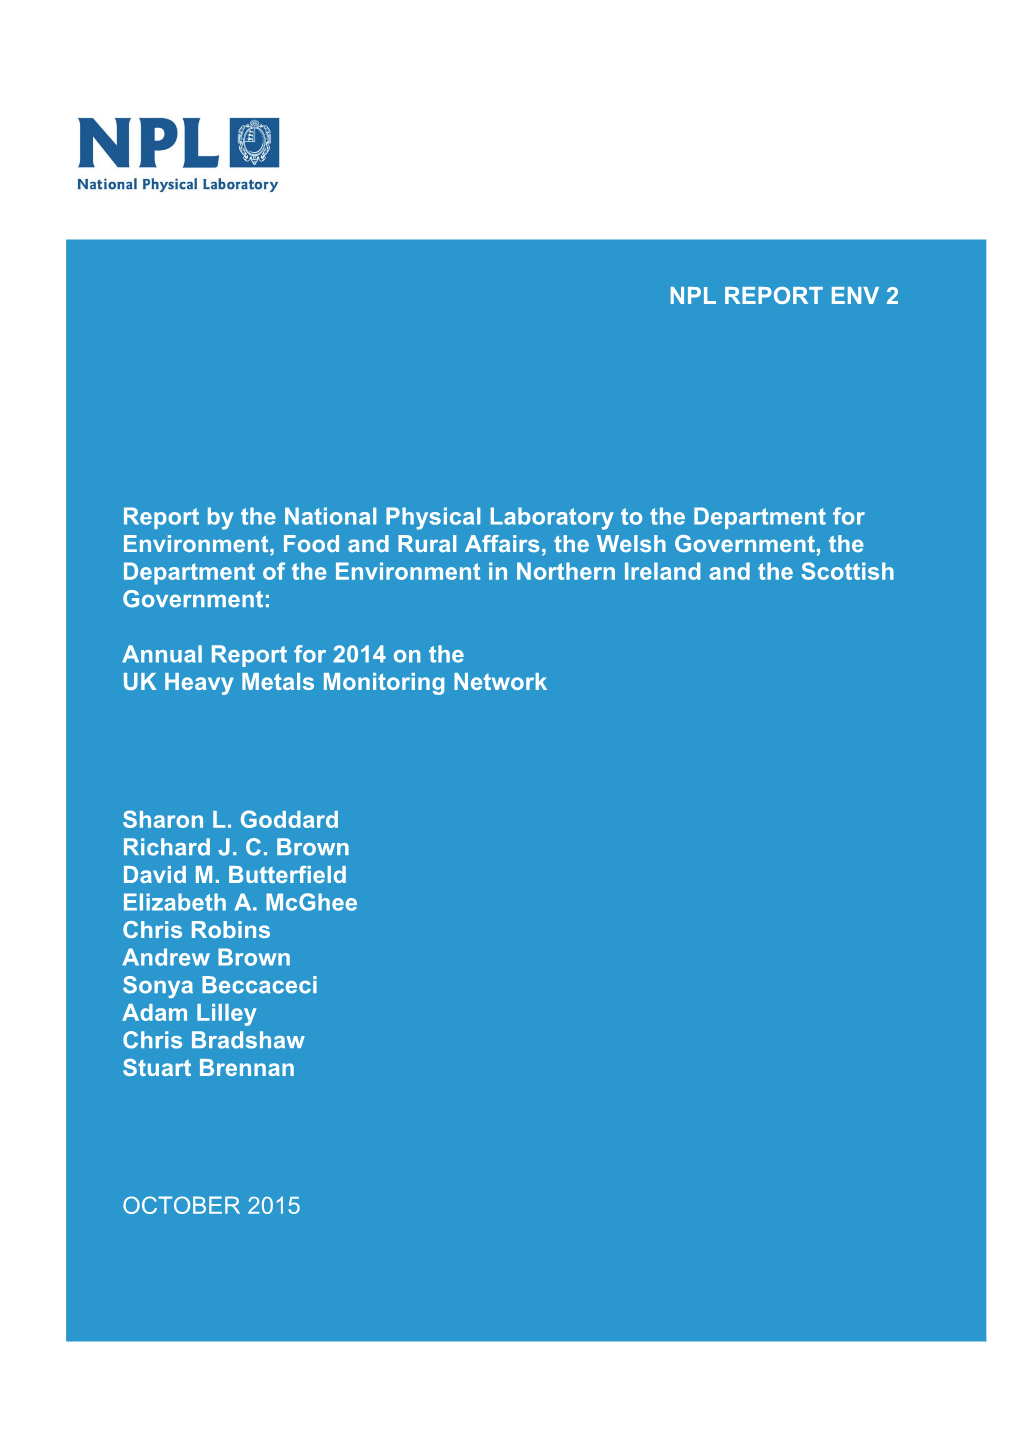 Annual Report for 2014 on the UK Heavy Metals Monitoring Network